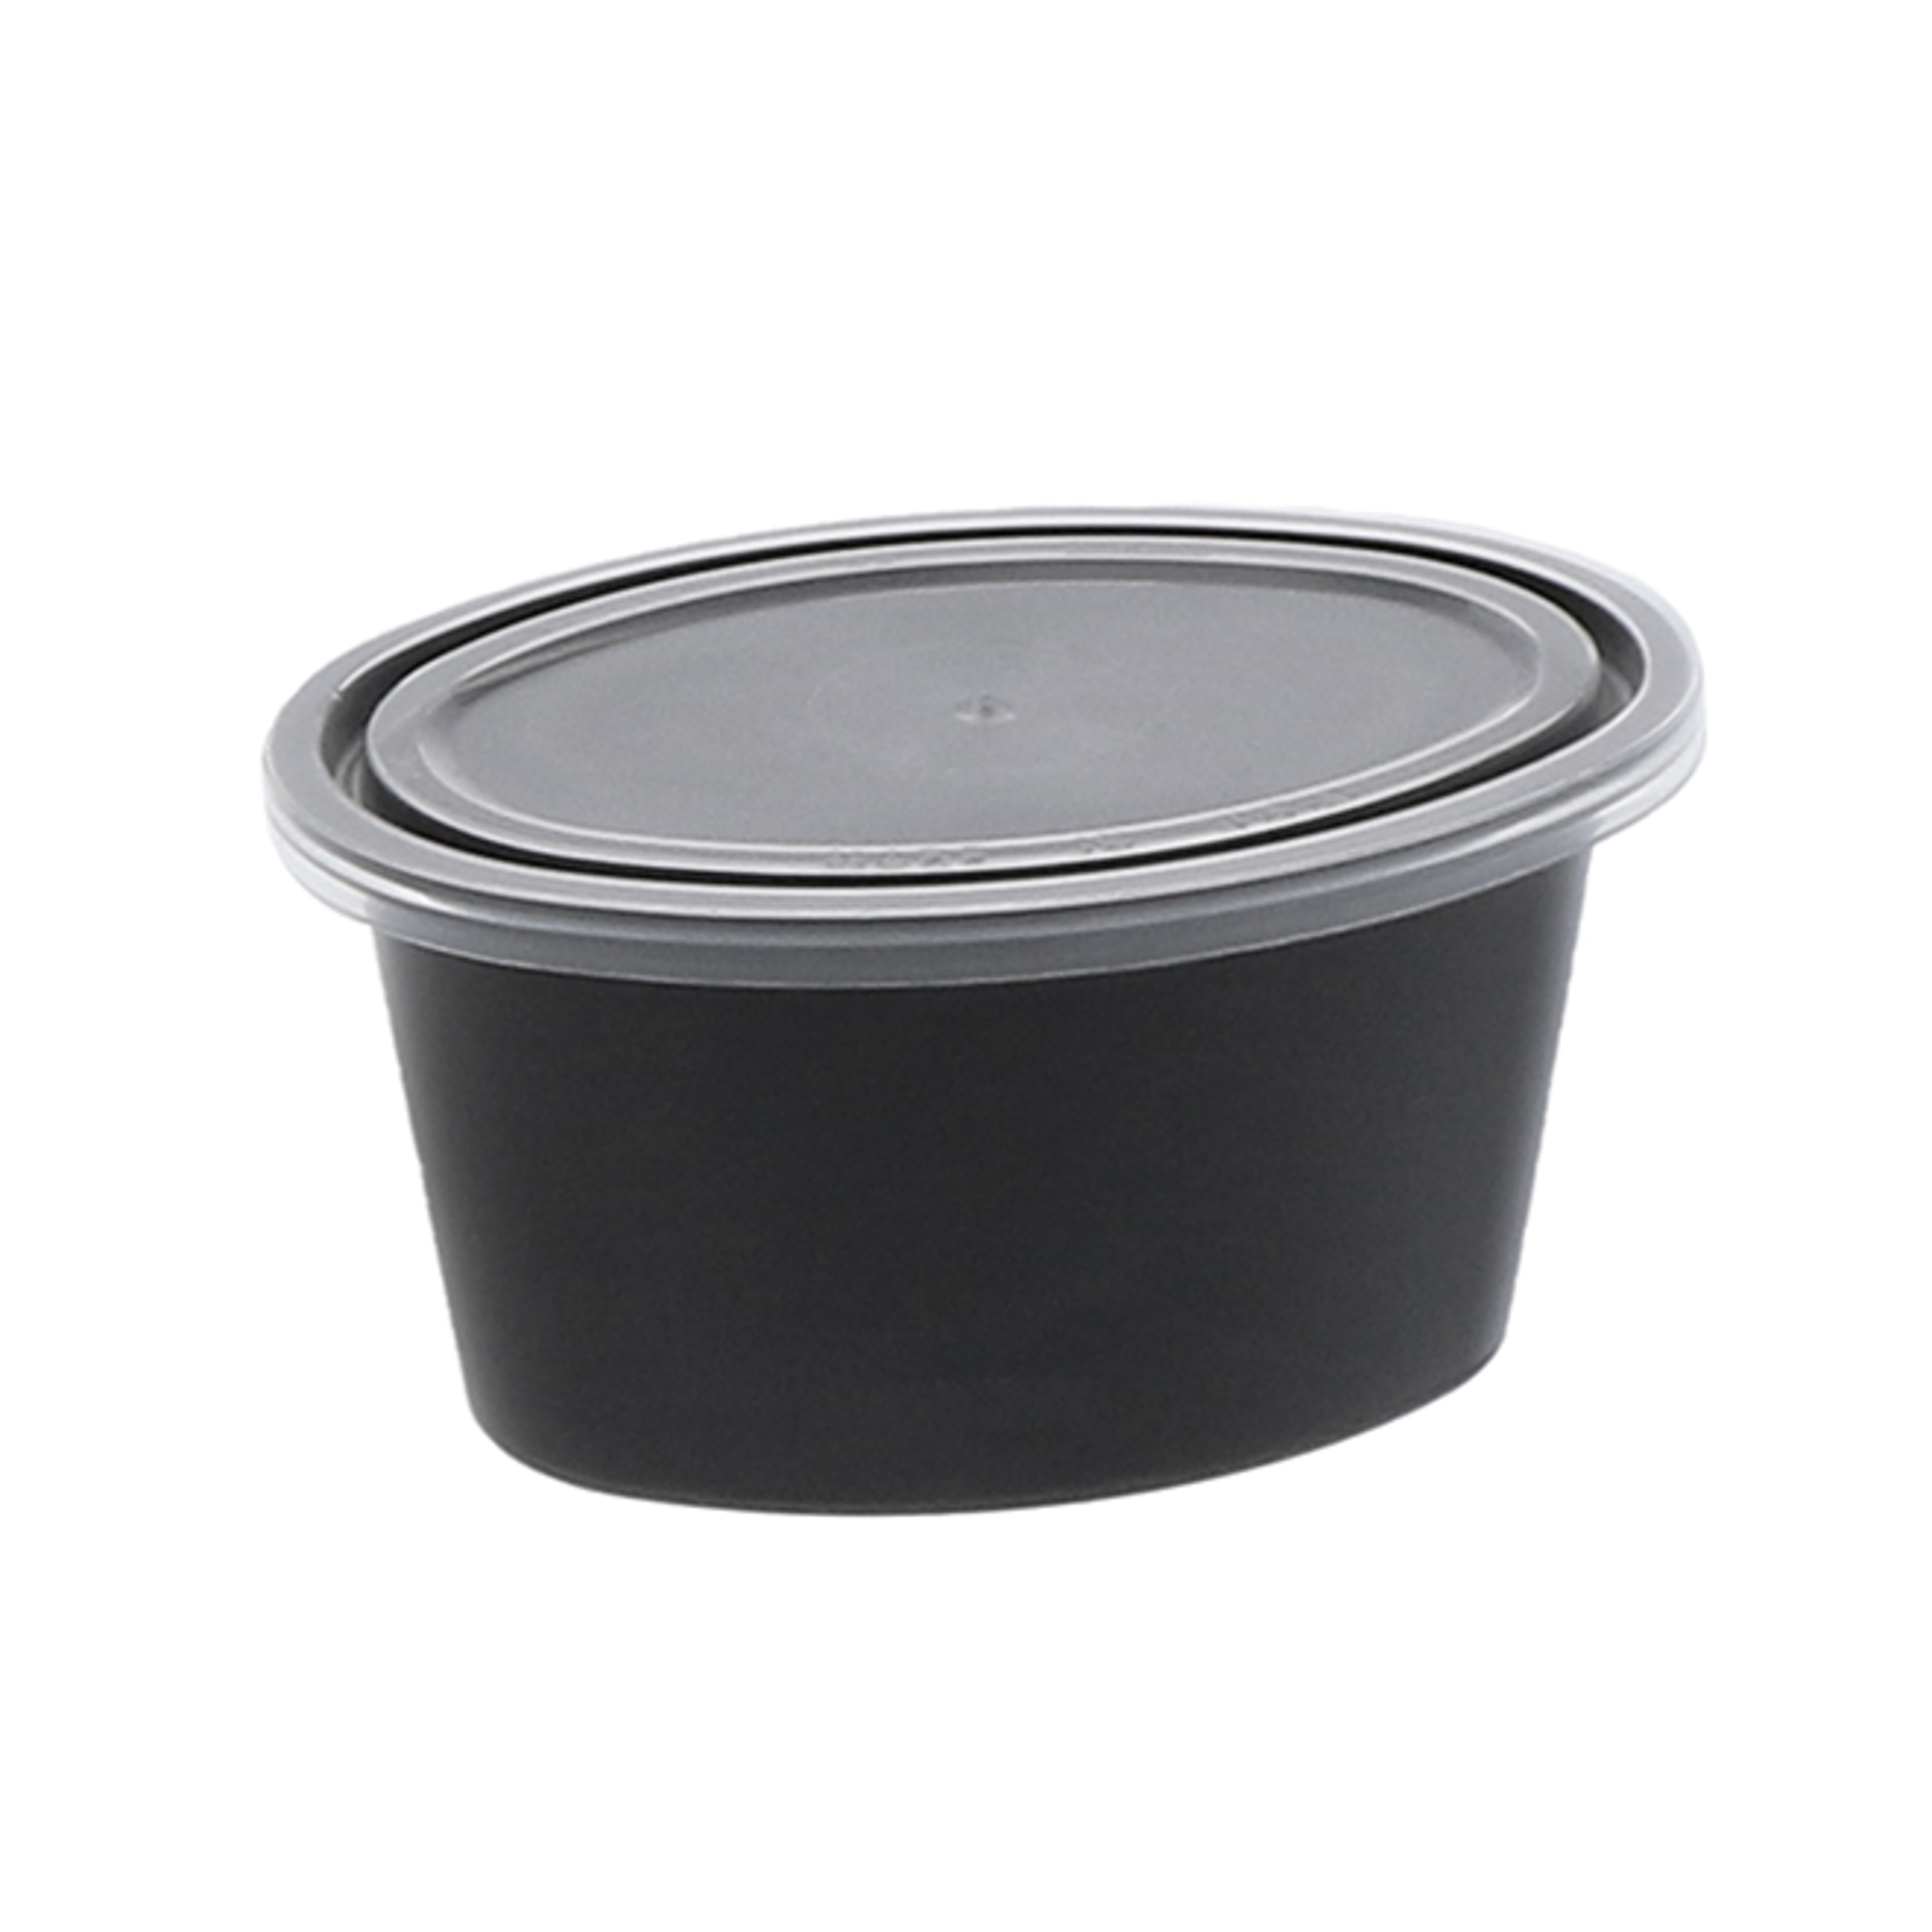 Ellipso® 4 oz. Microwavable Portion Cup and Lid Combo, Black, 500 ct.